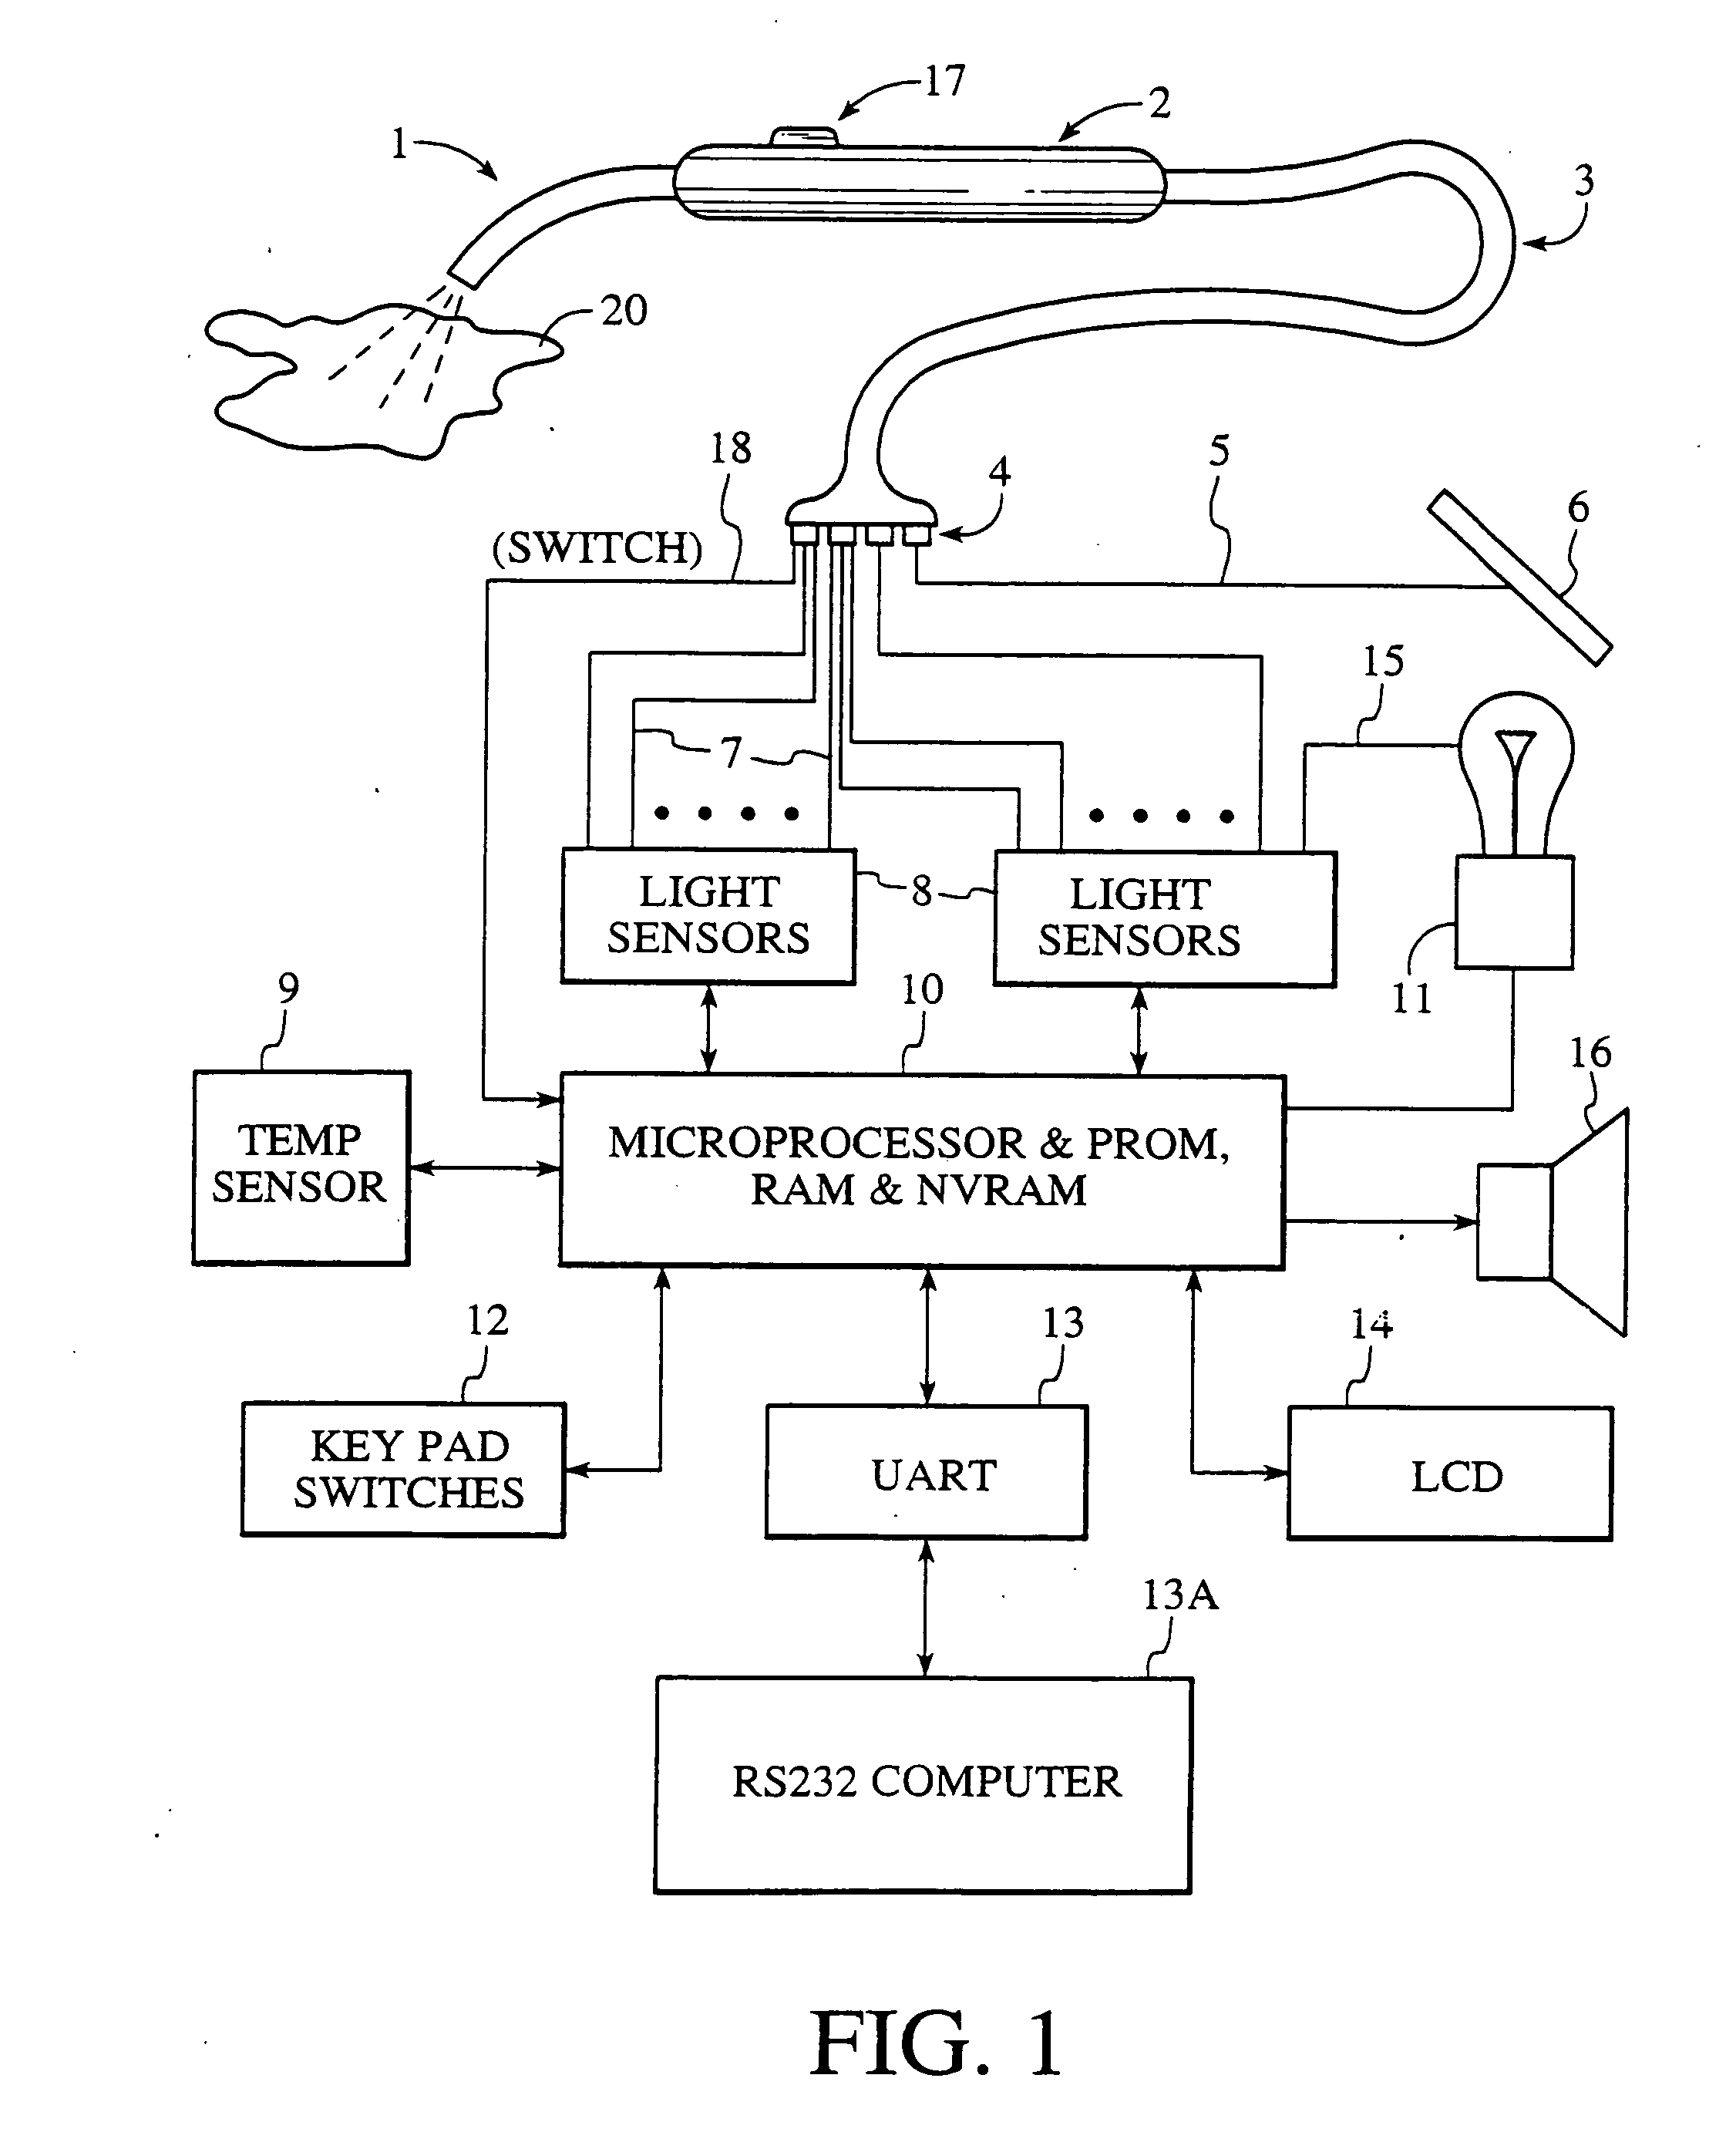 Apparatus and method for measuring color